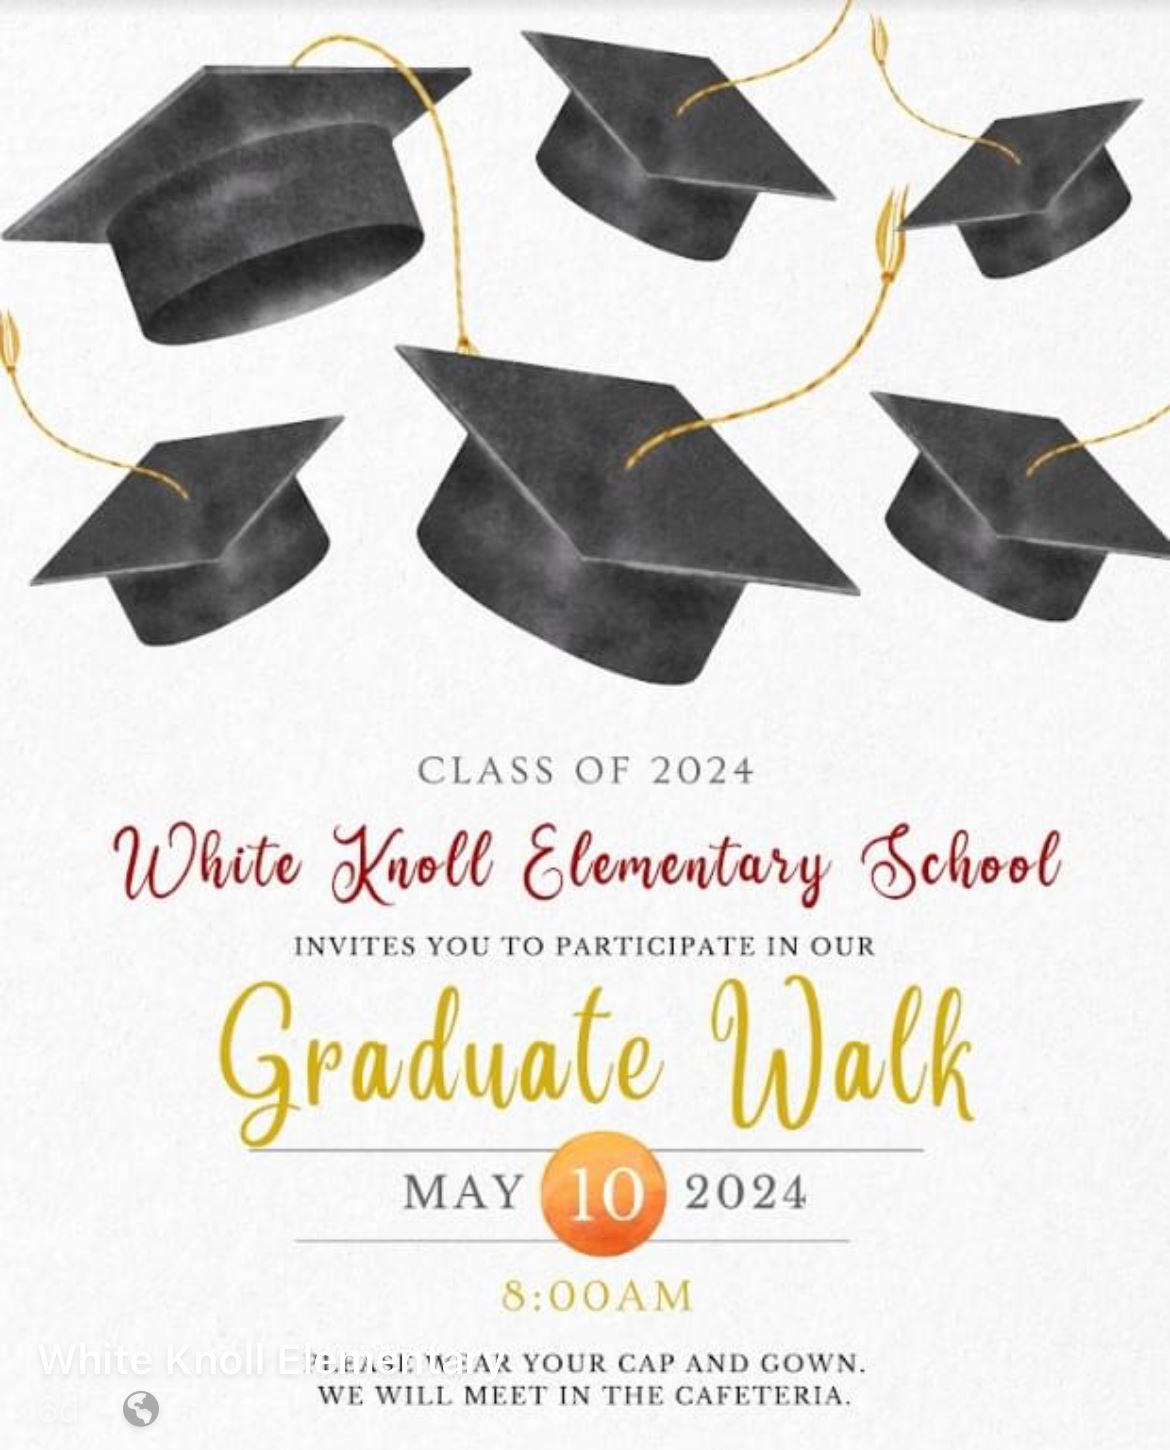 White Knoll Elementary Announces a Graduate Walk on May 10th at 8:00 am.